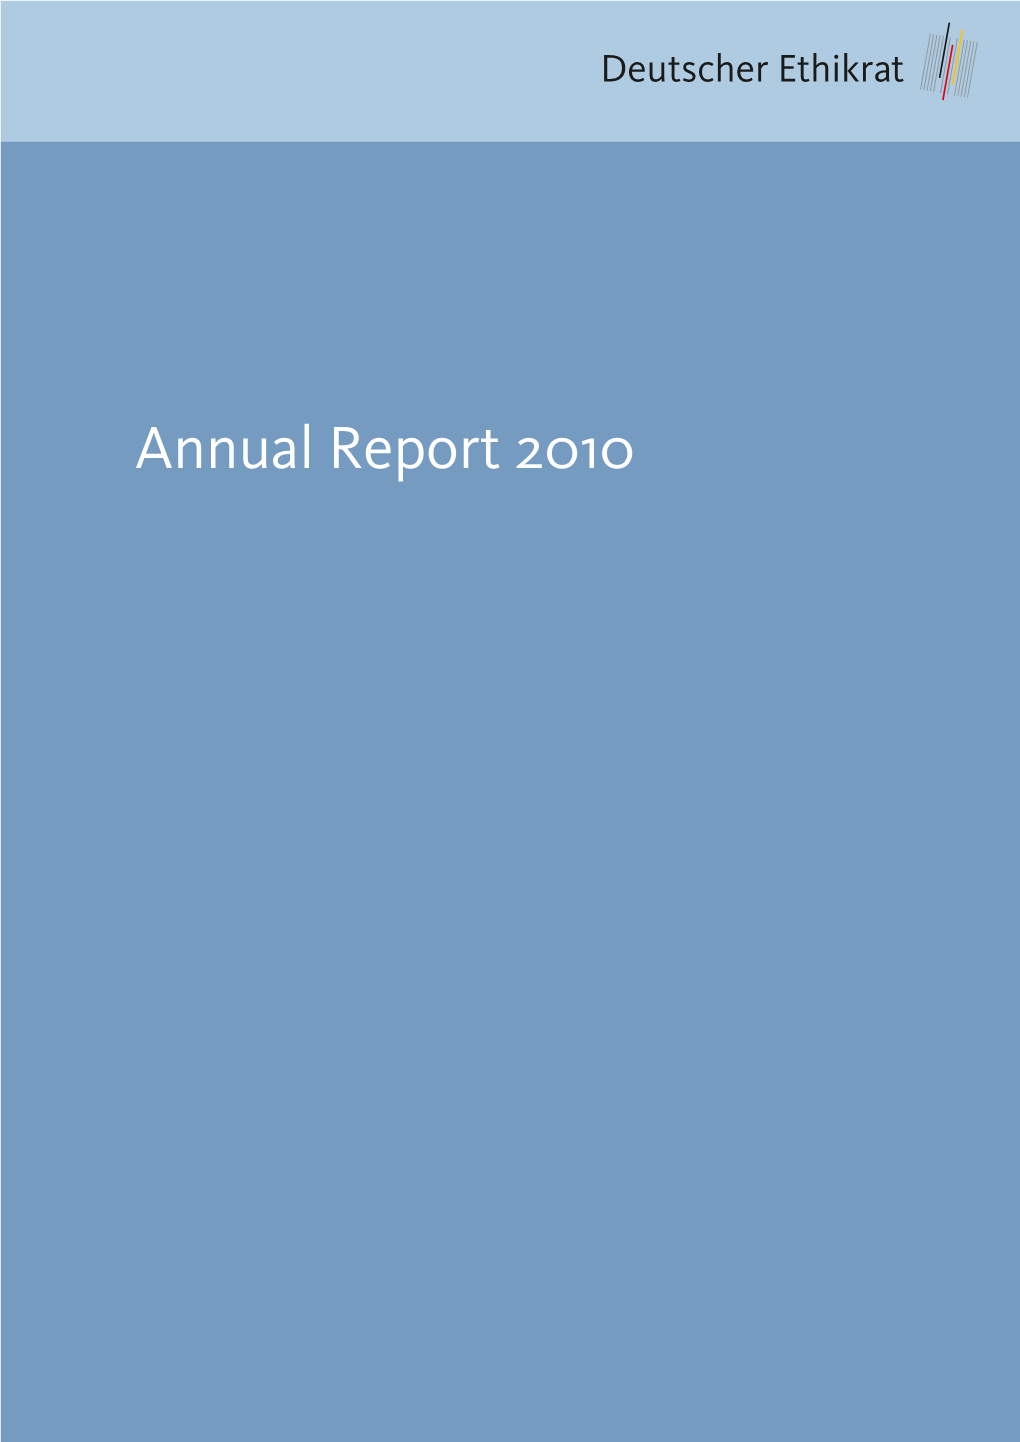 Annual Report 2010 Published by the German Ethics Council